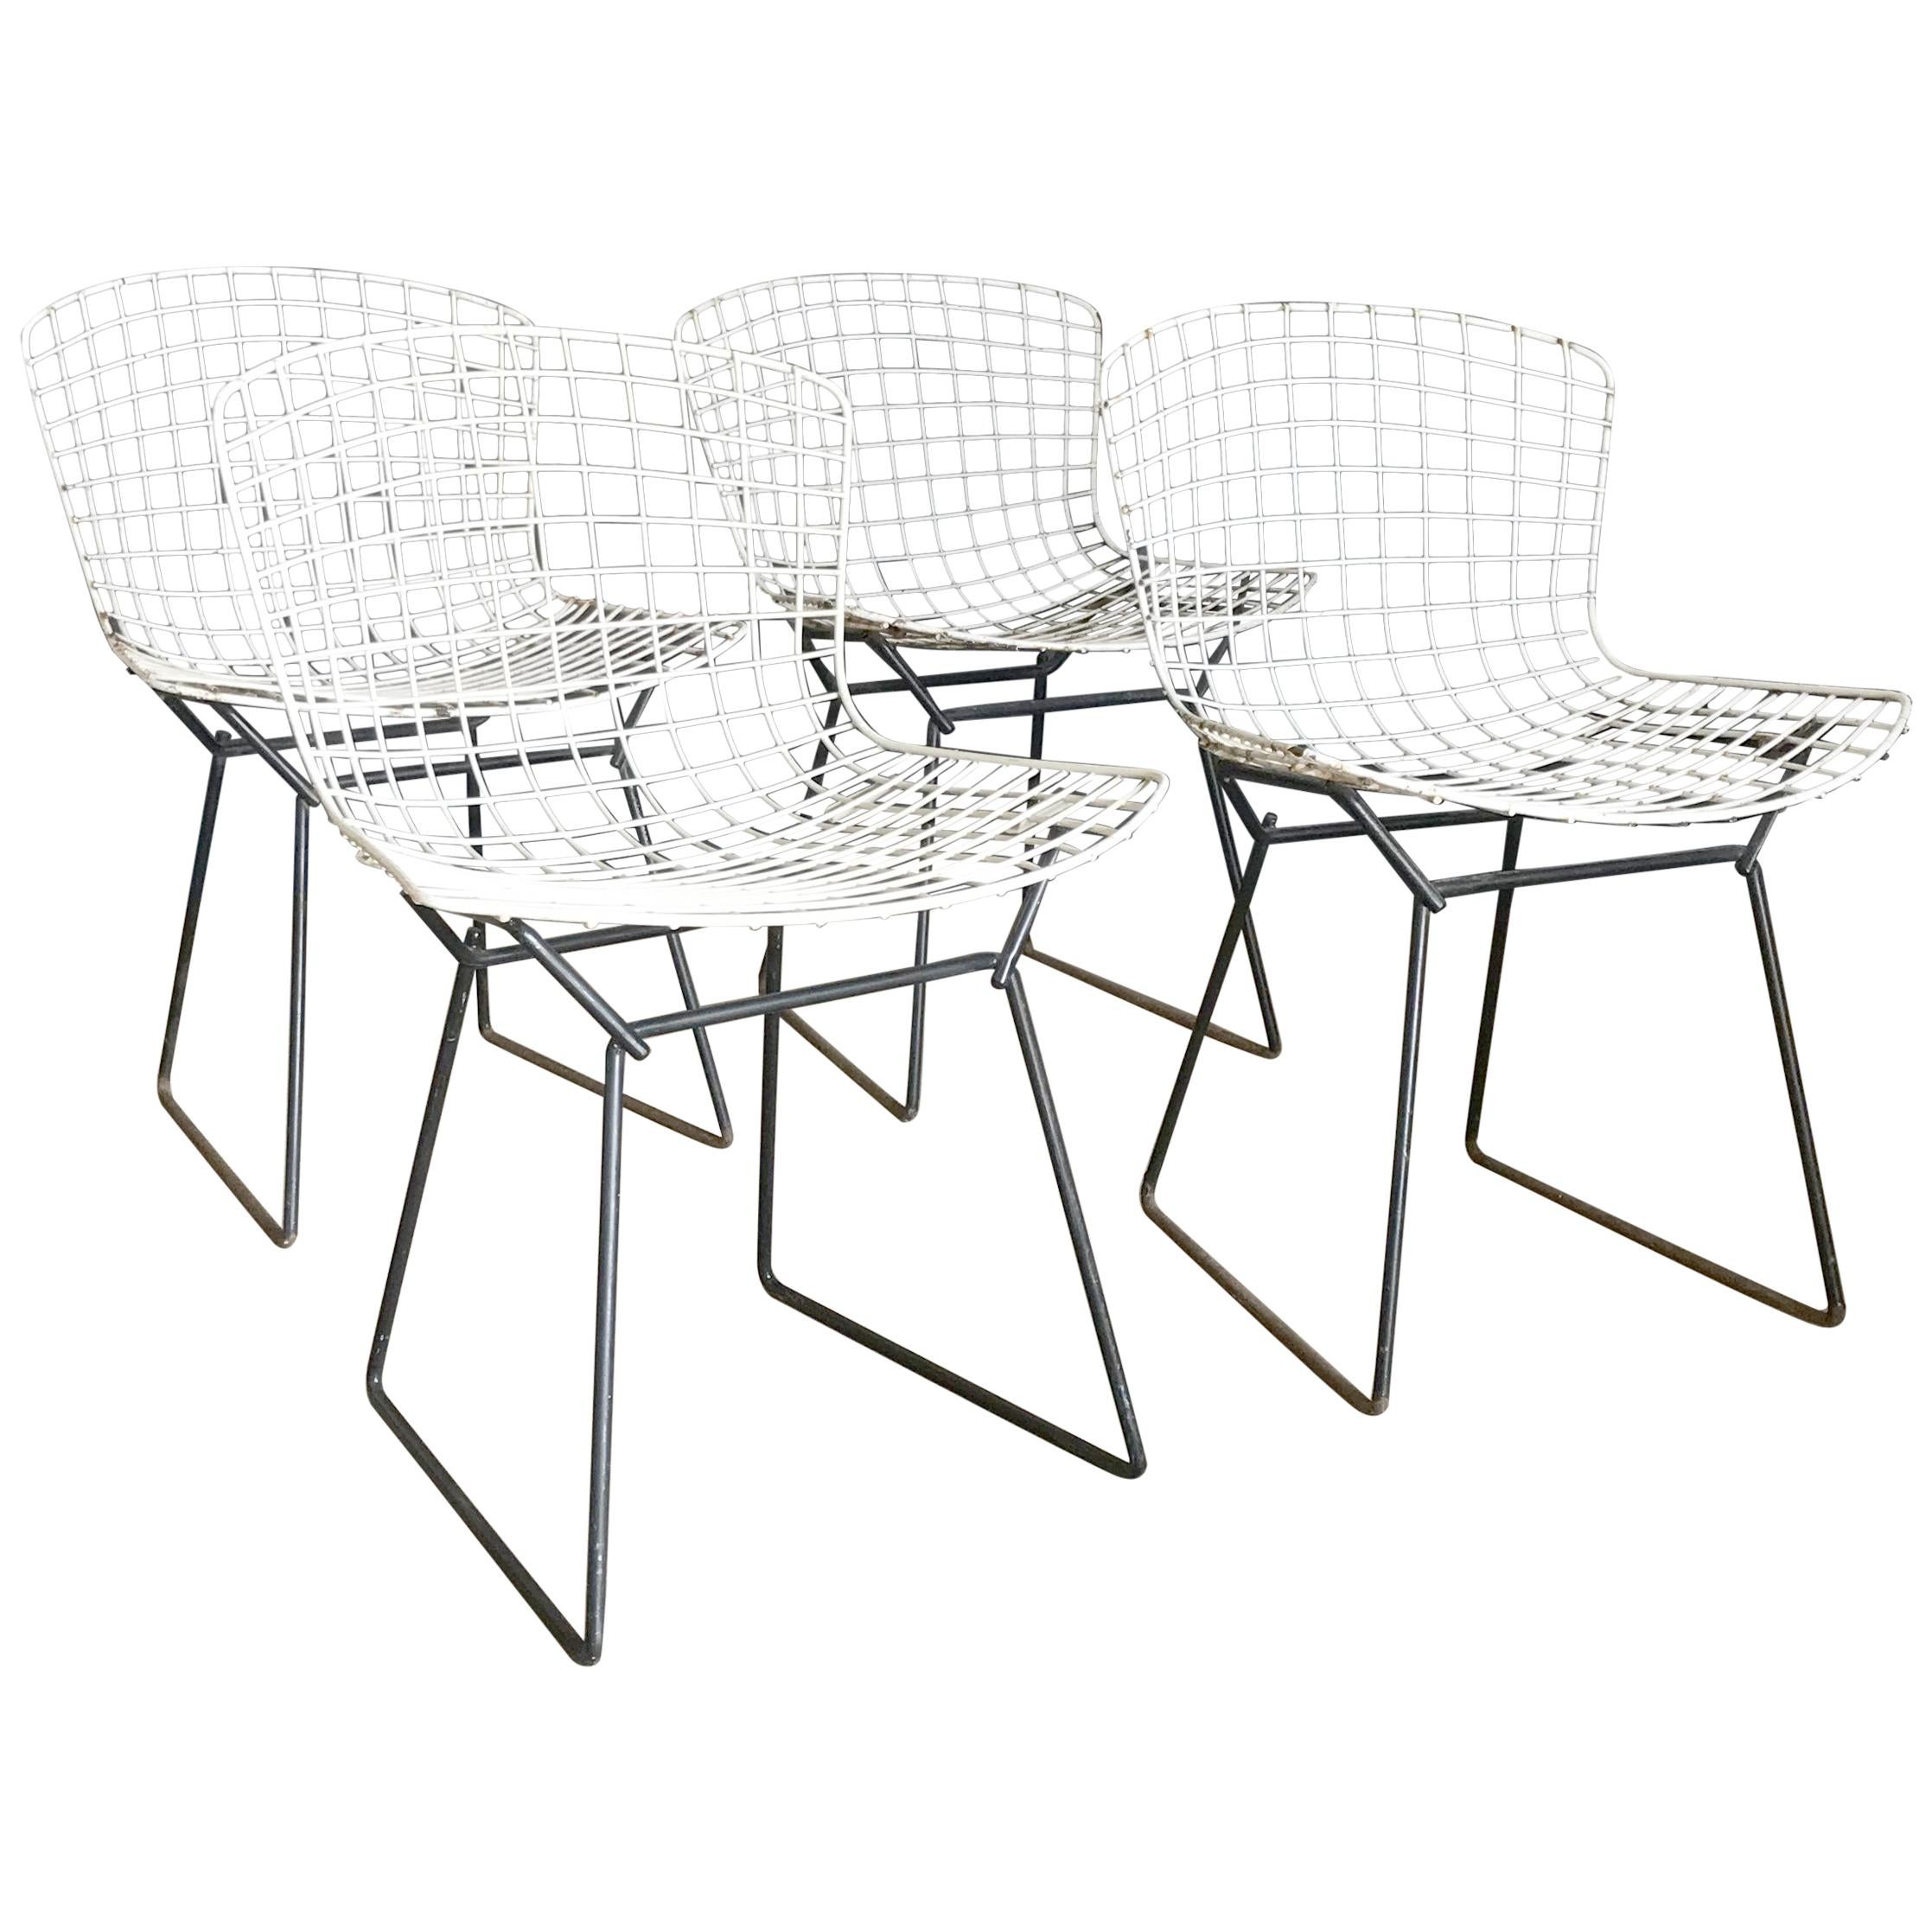 1952, Harrie Bertoia for Knoll International a Set of Wire Dining Chairs